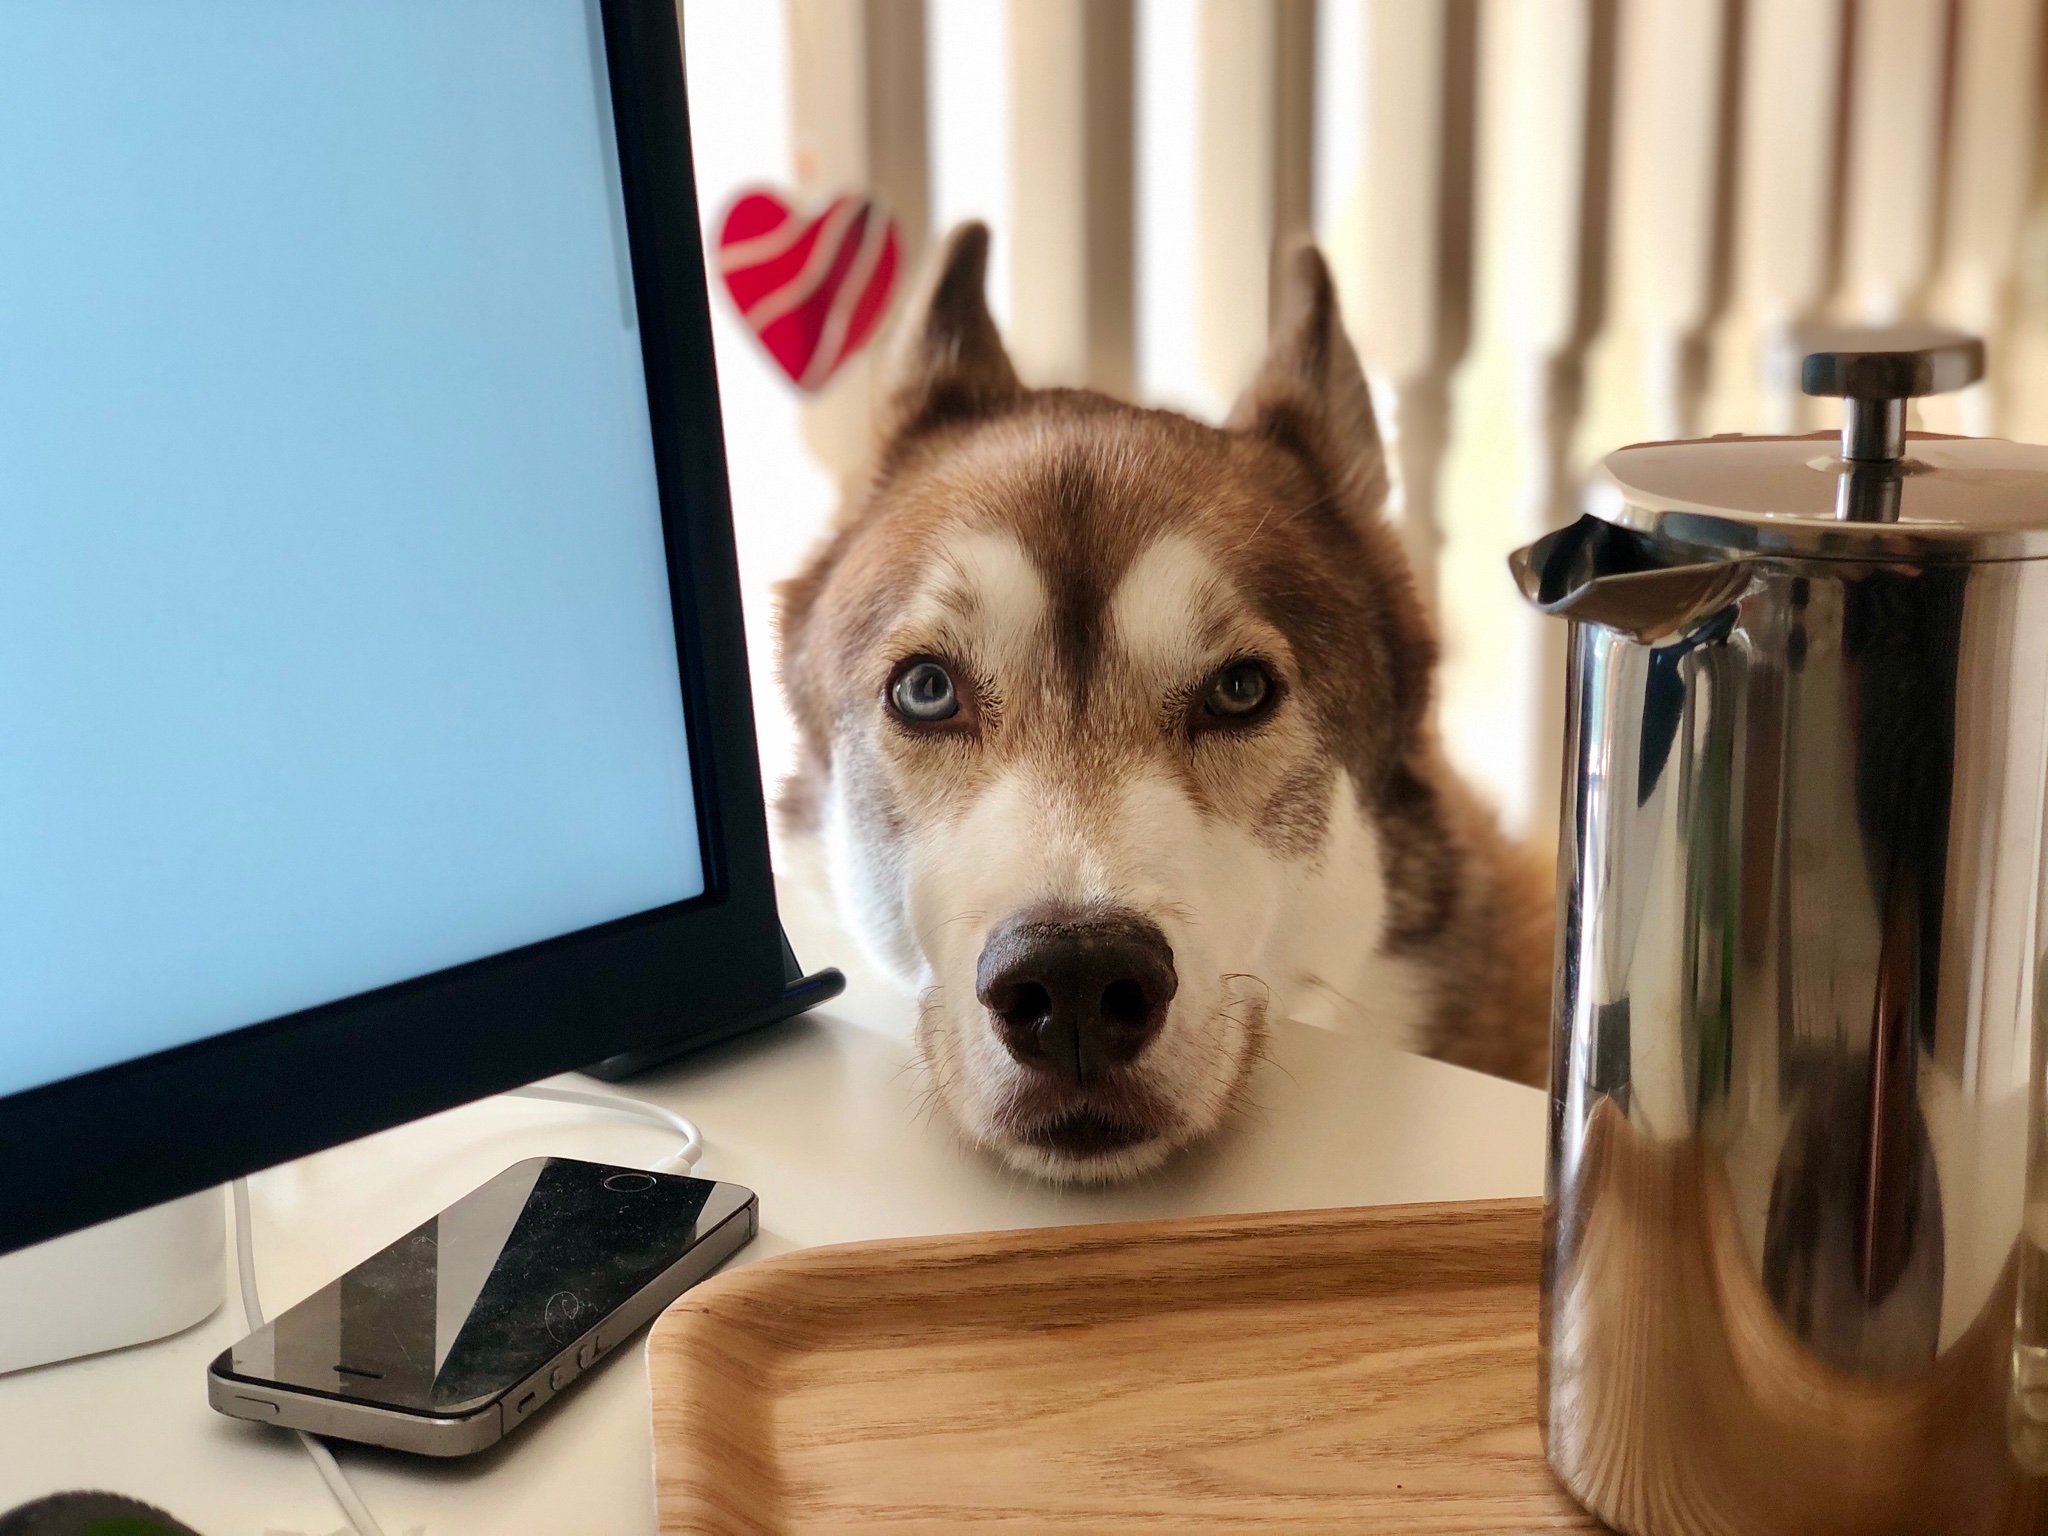 Oskar the huskamute with his chin resting on my desk between the monitor and coffee pot.